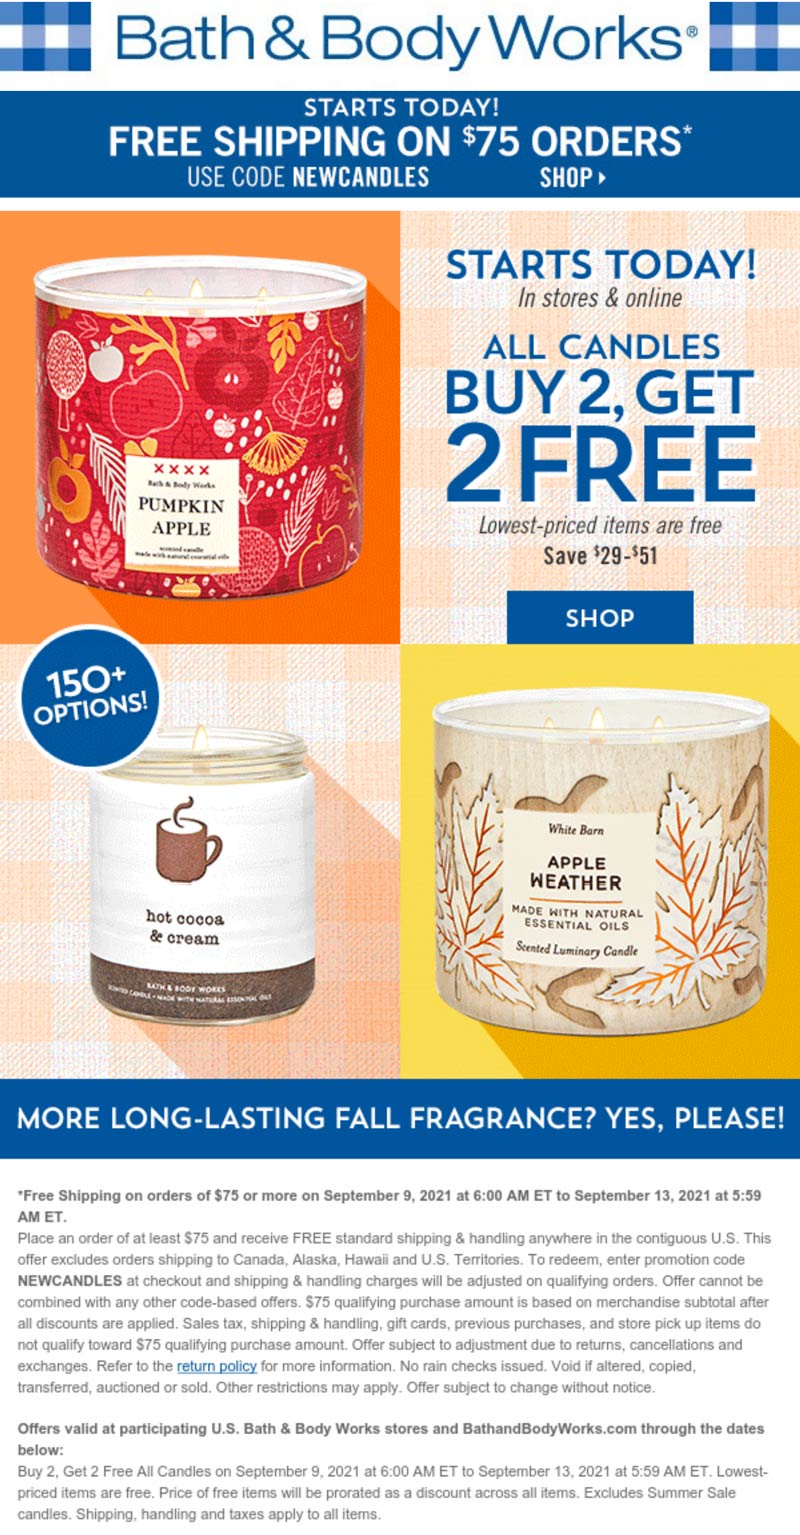 Bath & Body Works stores Coupon  4-for-2 on candles at Bath & Body Works, or online via promo code NEWCANDLES #bathbodyworks 